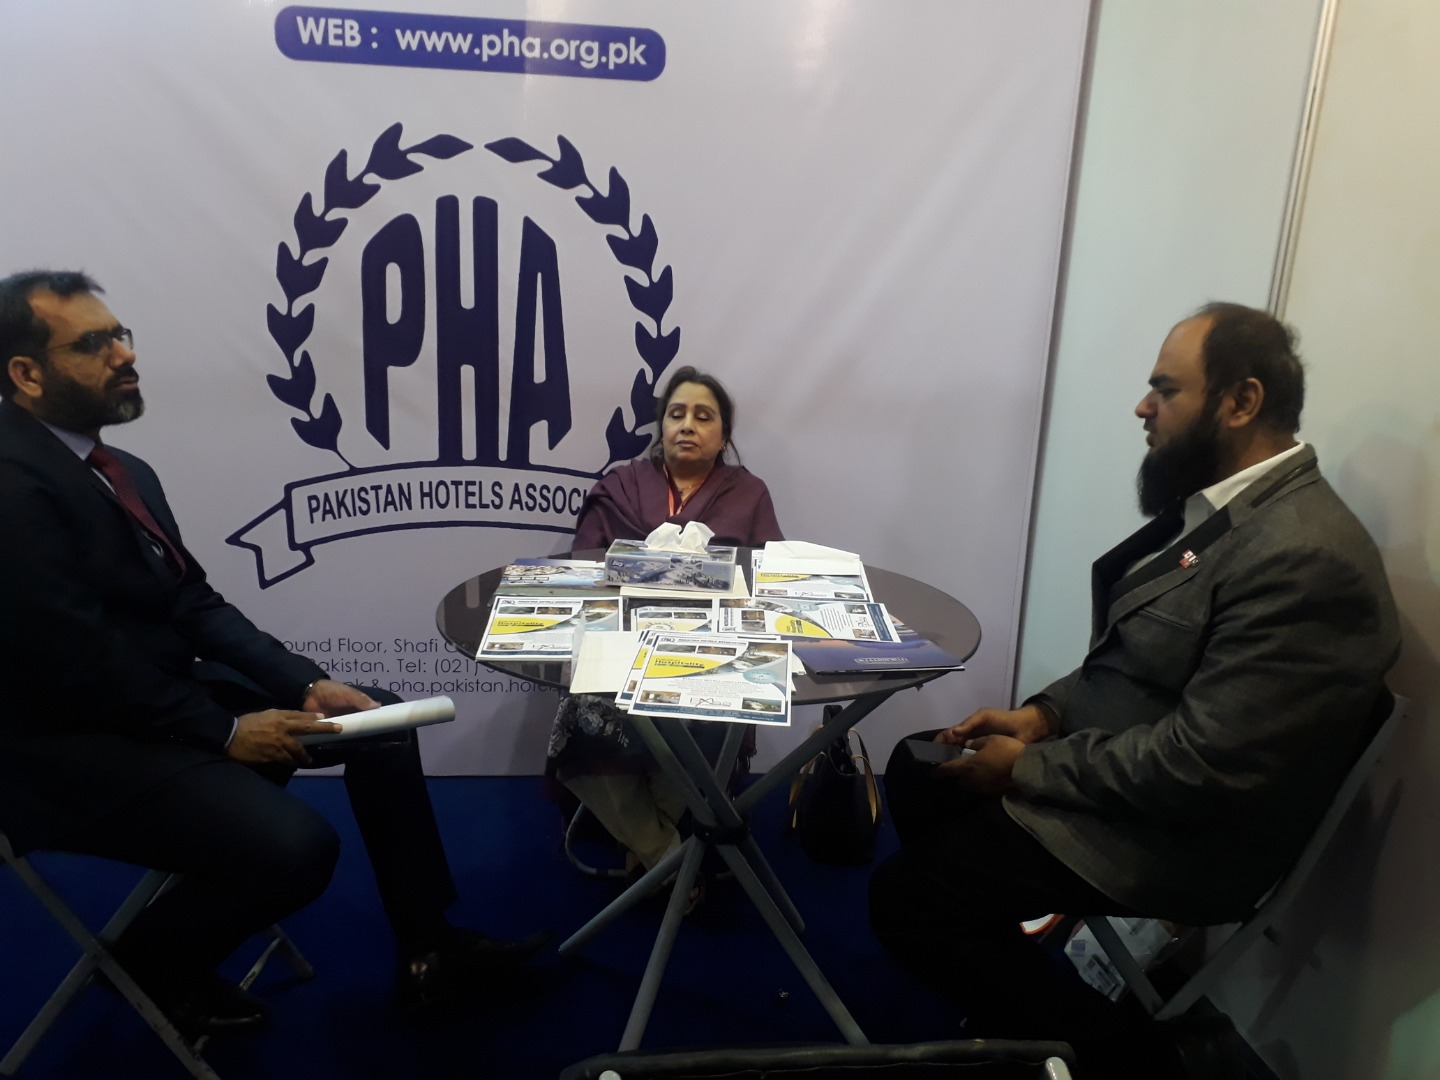 PHA participation at Pakistan Hospitality Show 2019 held on 3-5 December, 2019 at Expo Centre Karach